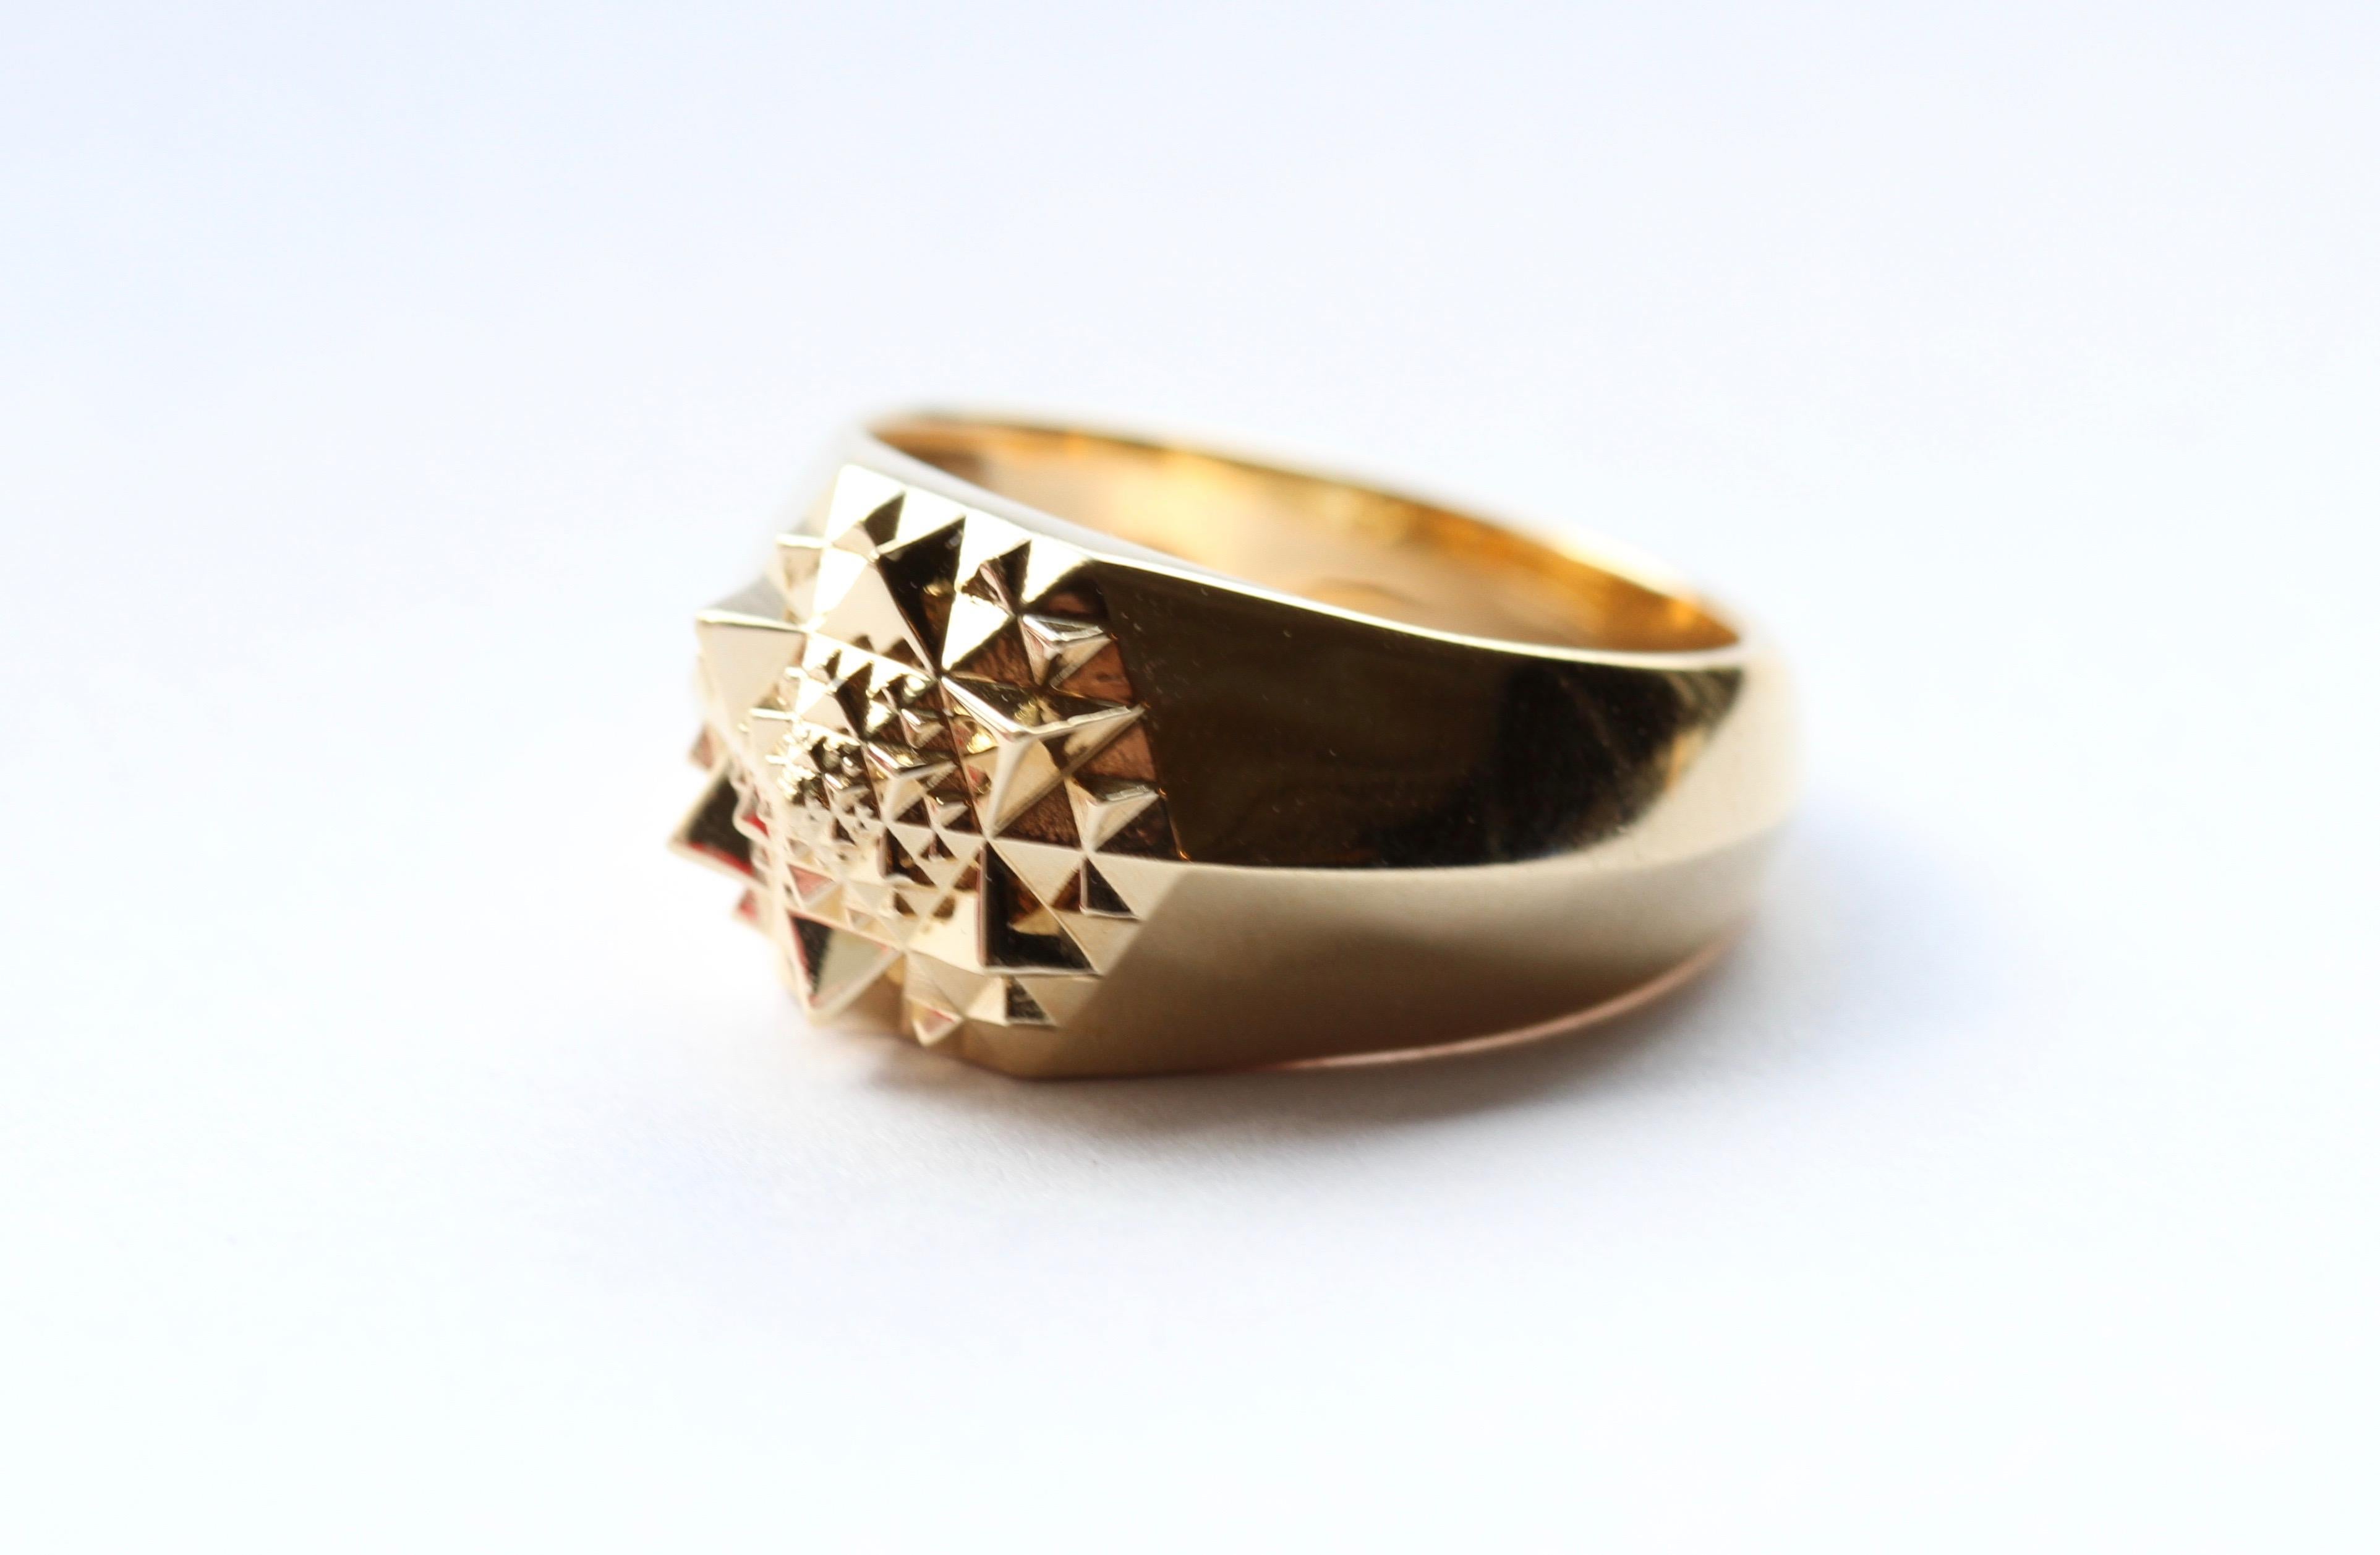 Unisex 18K Gold Sacred Signet Ring by John Brevard In New Condition For Sale In Coral Gables, FL